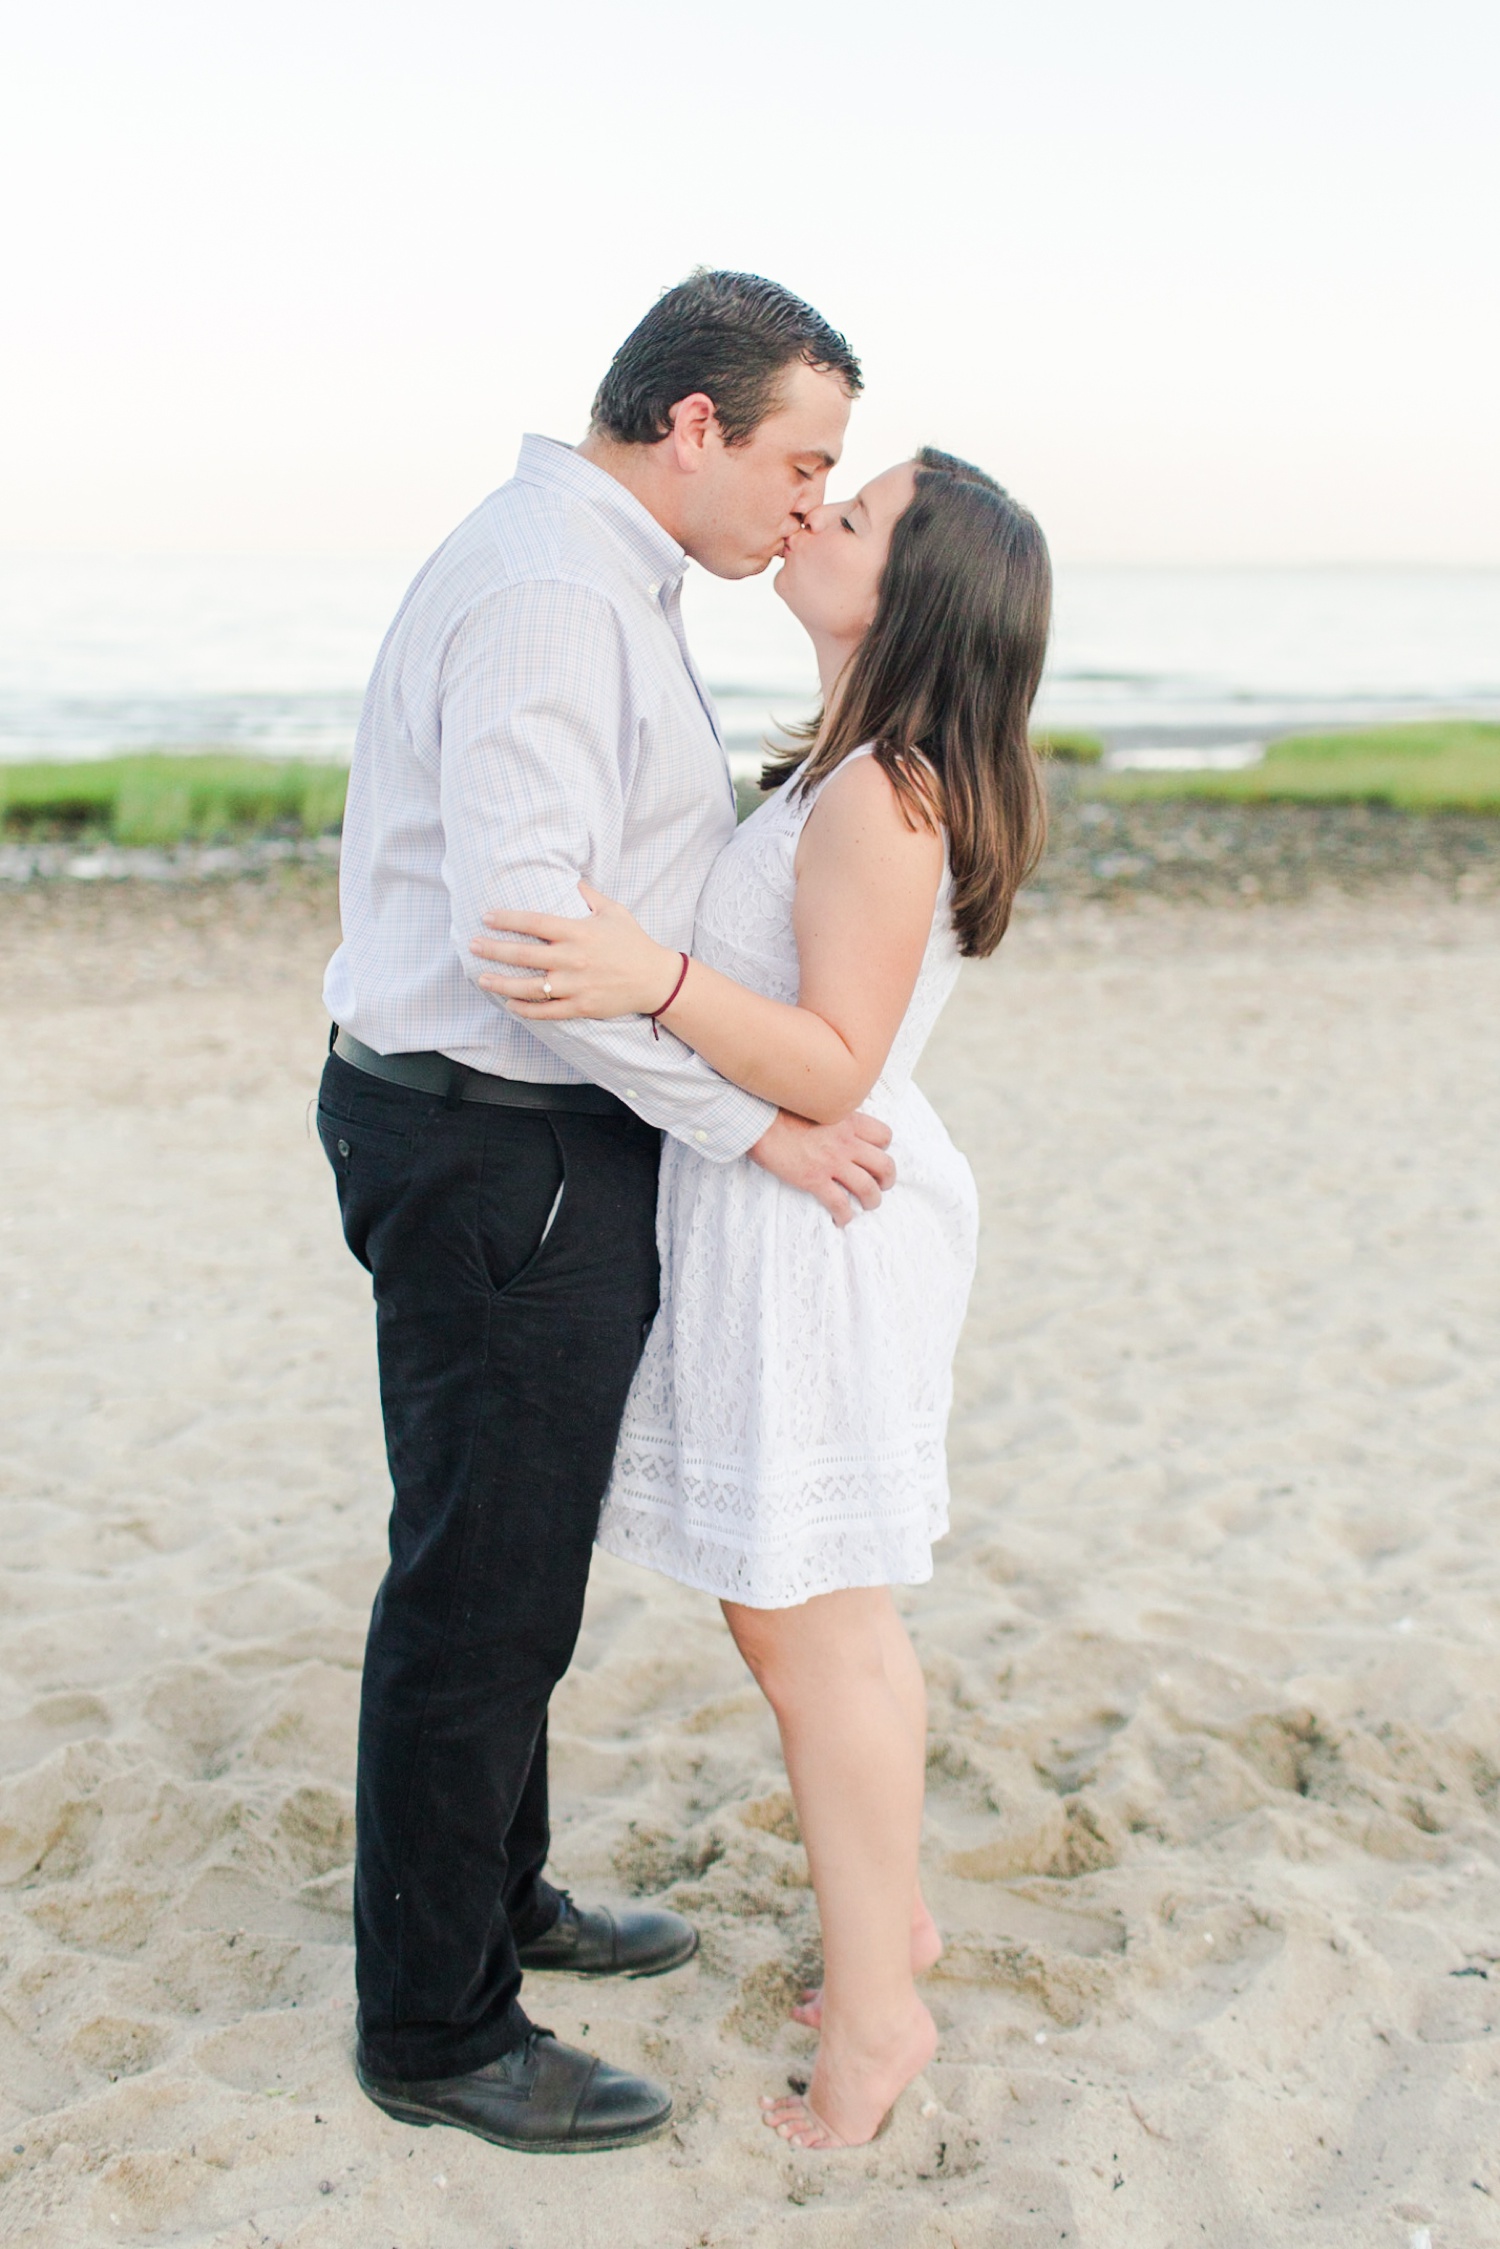 tods-point-engagement-session-greenwich-ct-top-connecticut-new-york-destination-wedding-photographer-shaina-lee-photography-photo